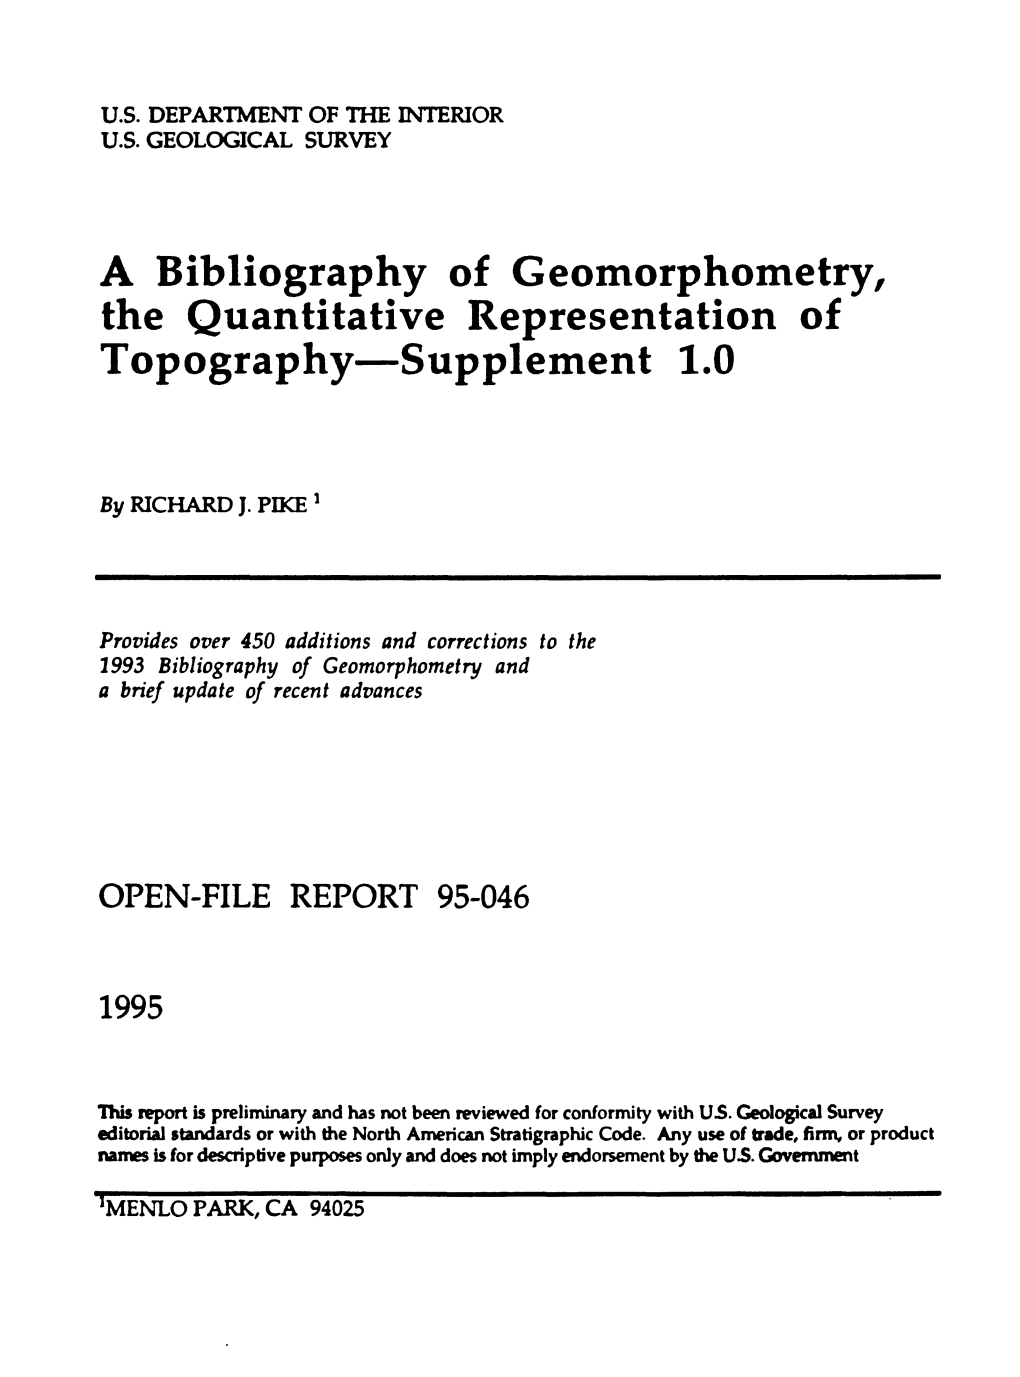 A Bibliography of Geomorphometry, the Quantitative Representation of Topography Supplement 1.0